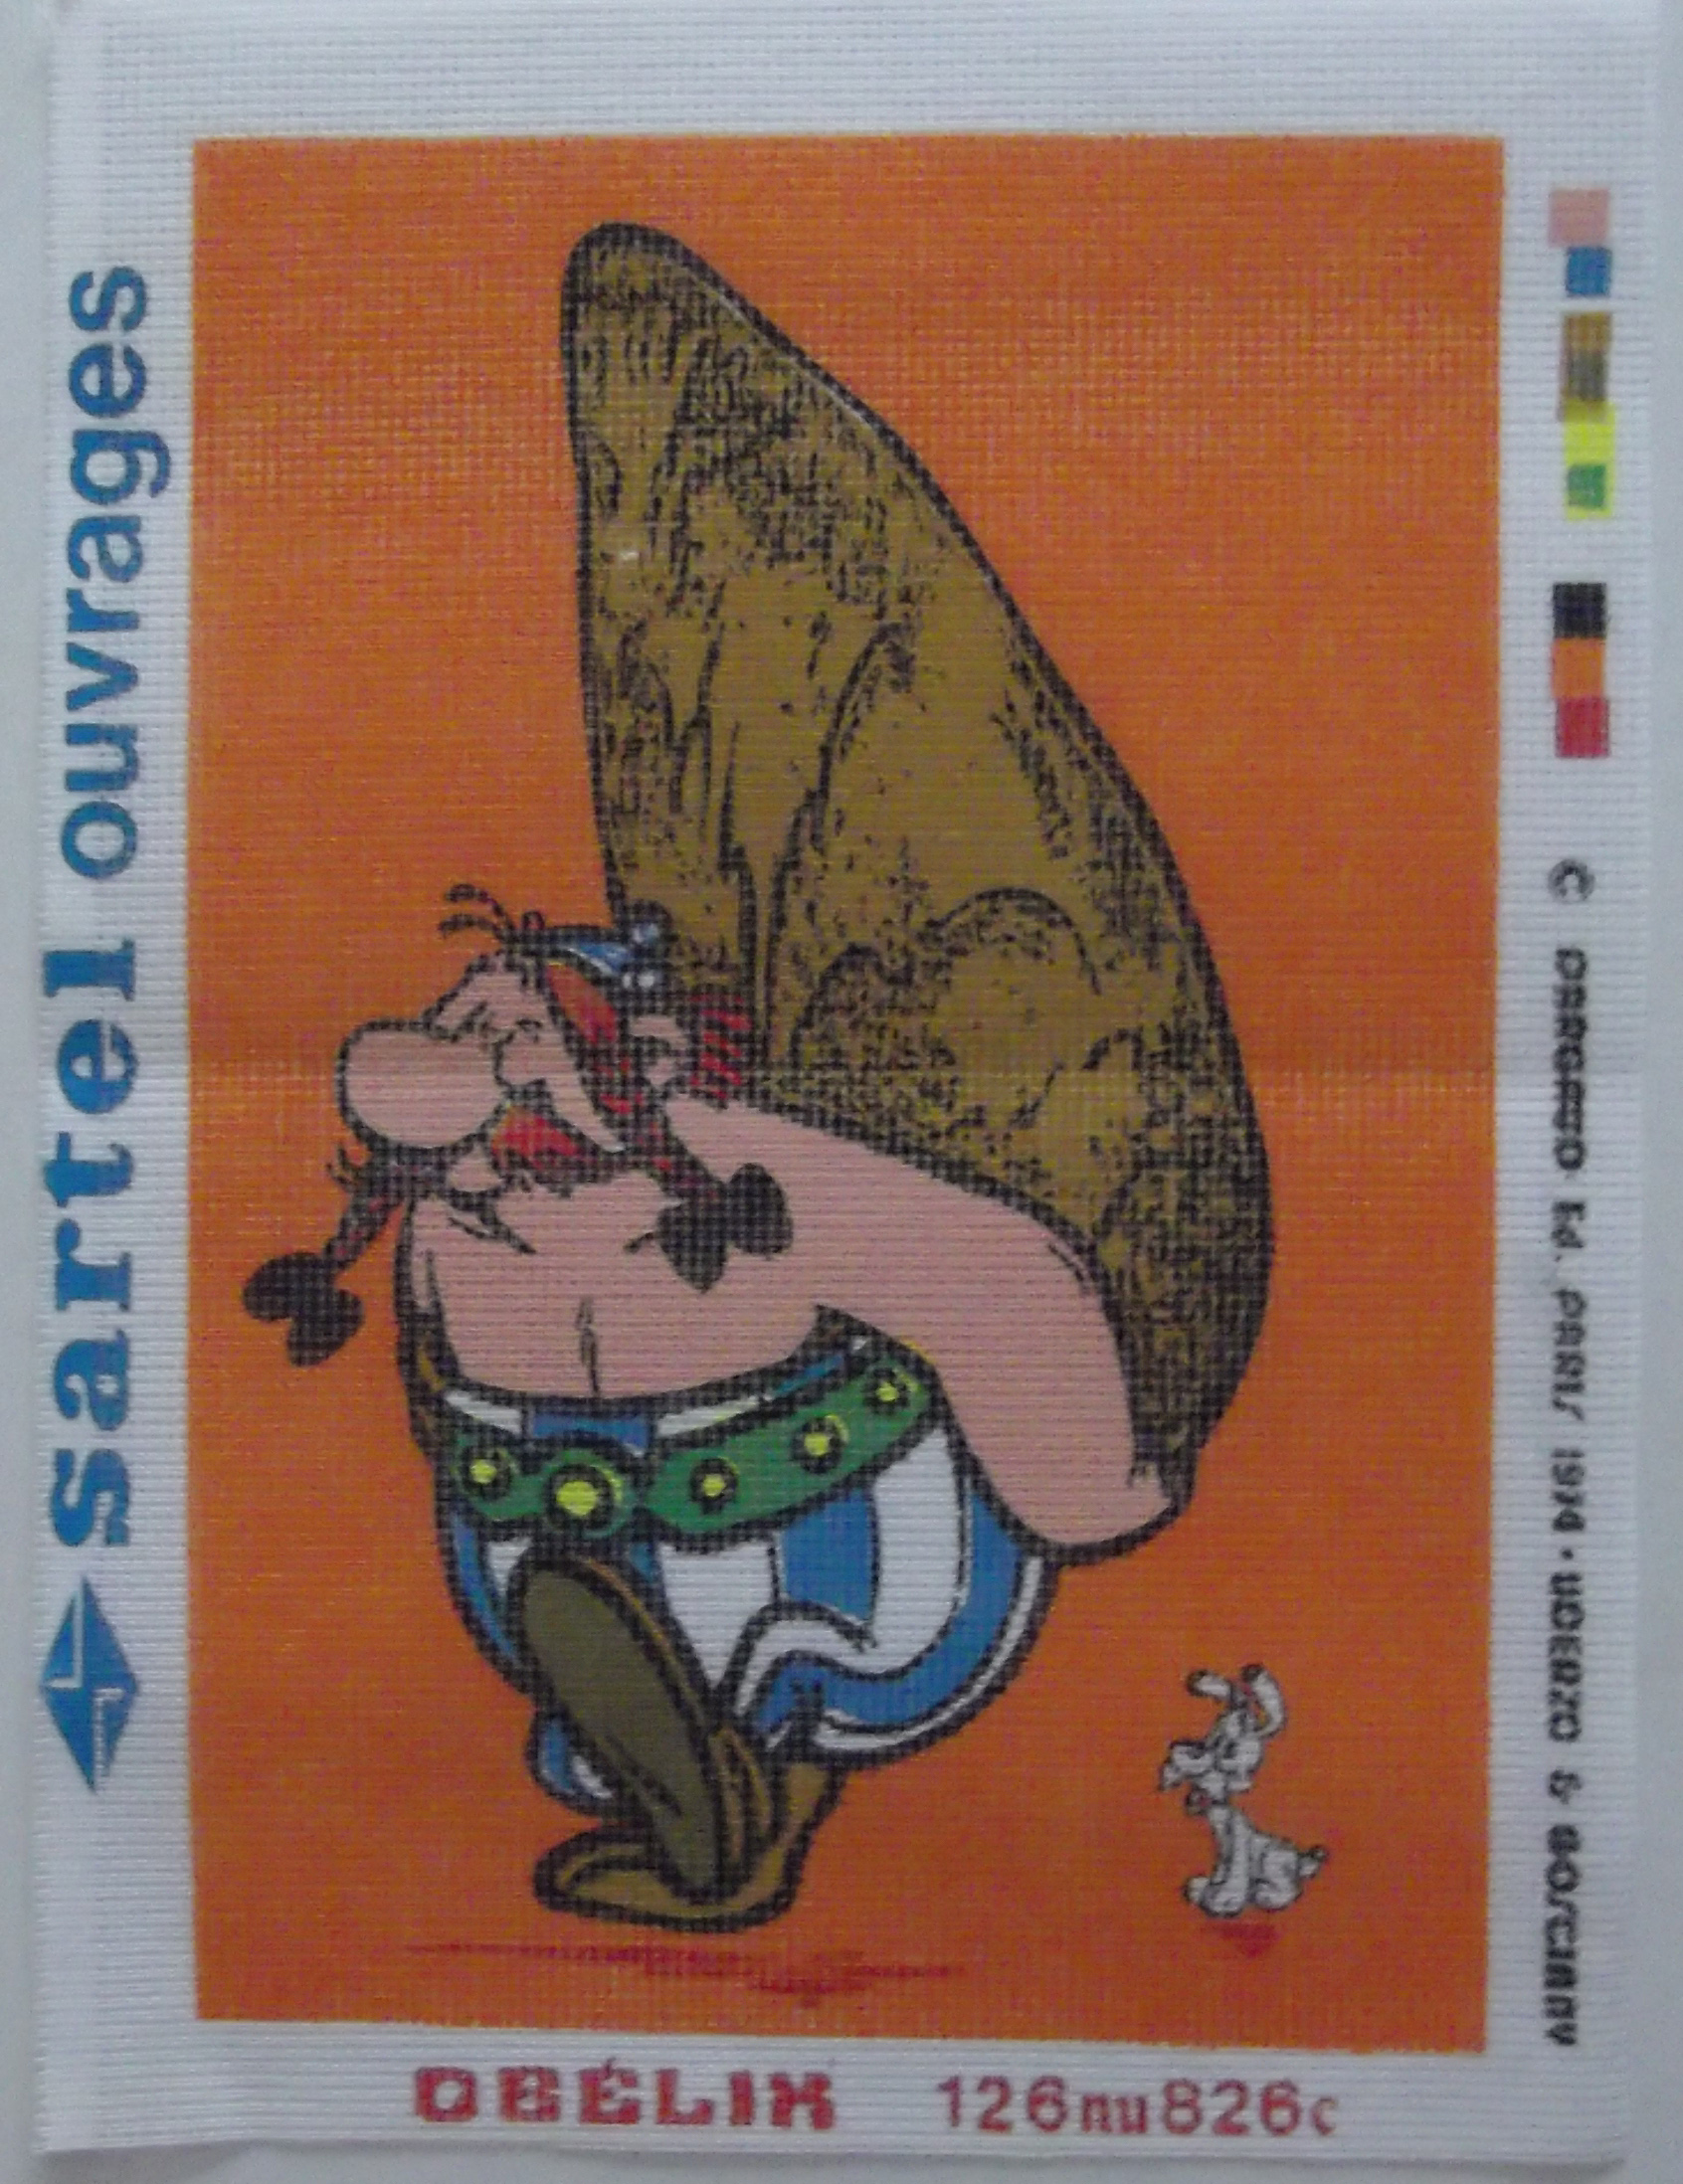 ma collection astérix  - Page 5 2402200532456086018359886